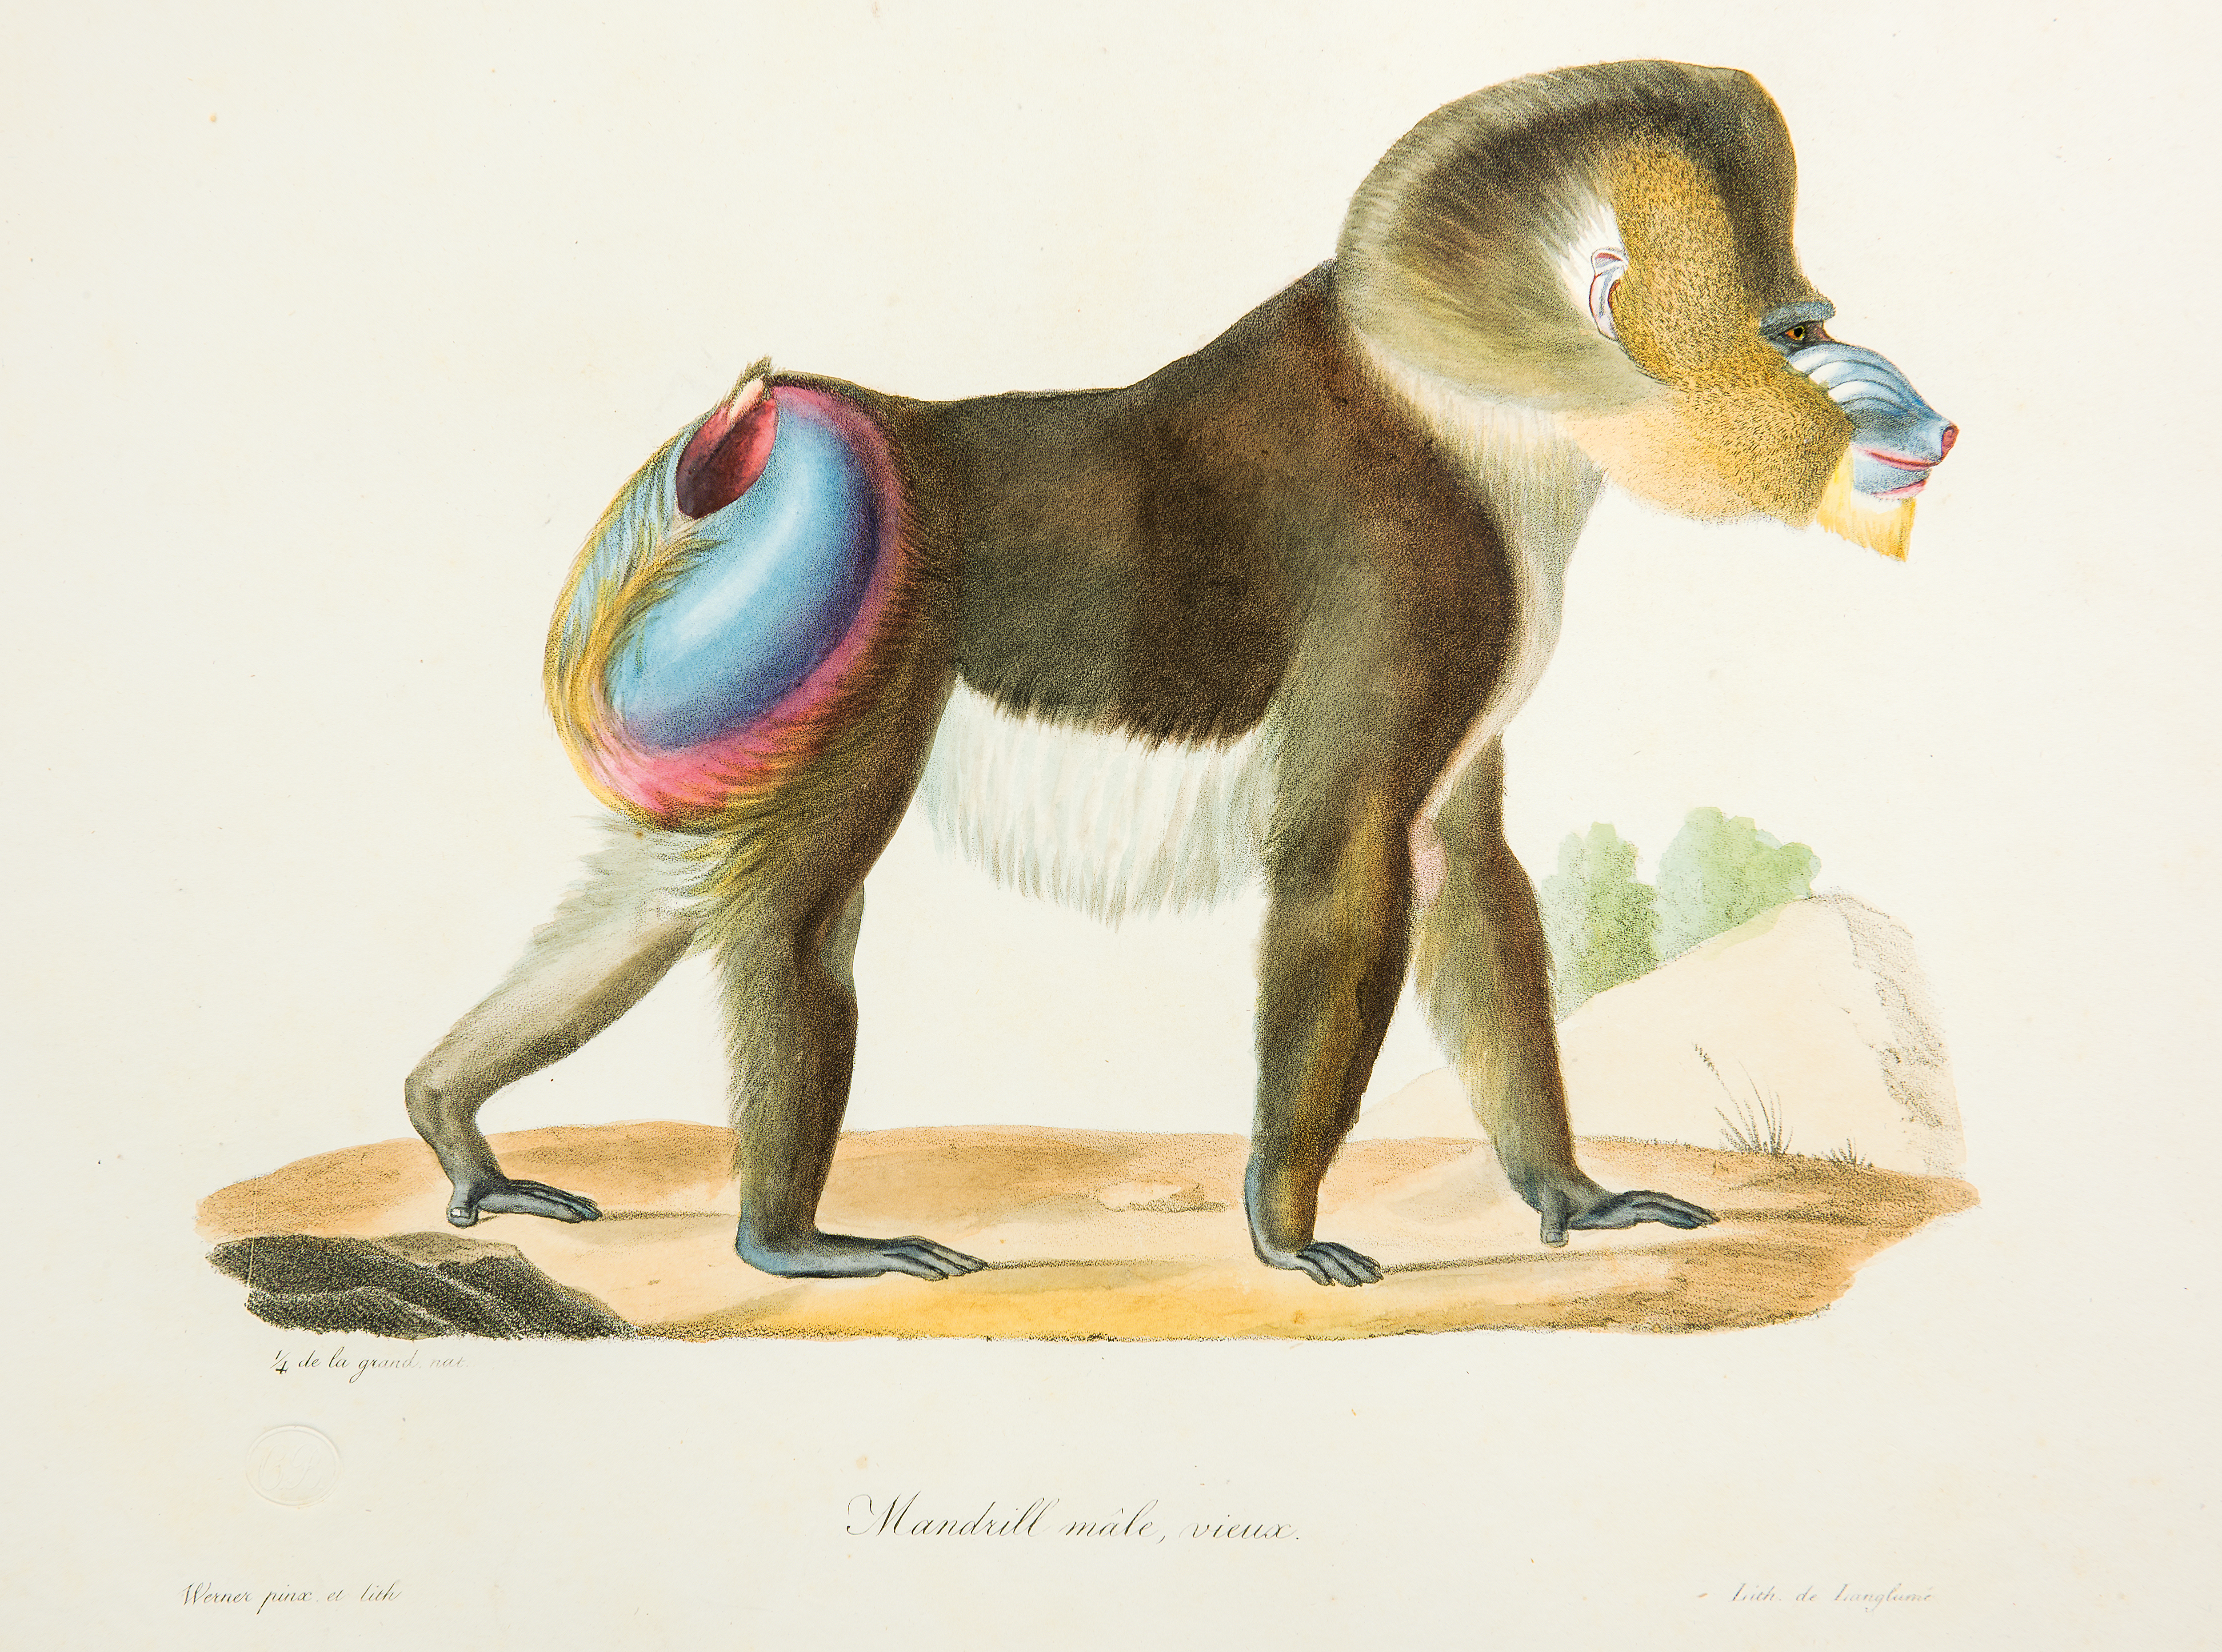 Mandrill by C.P. Lasteyrie ner de Saillant after Jean-Charles Werner - 1822–1829 Museum of King Jan III's Palace at Wilanów